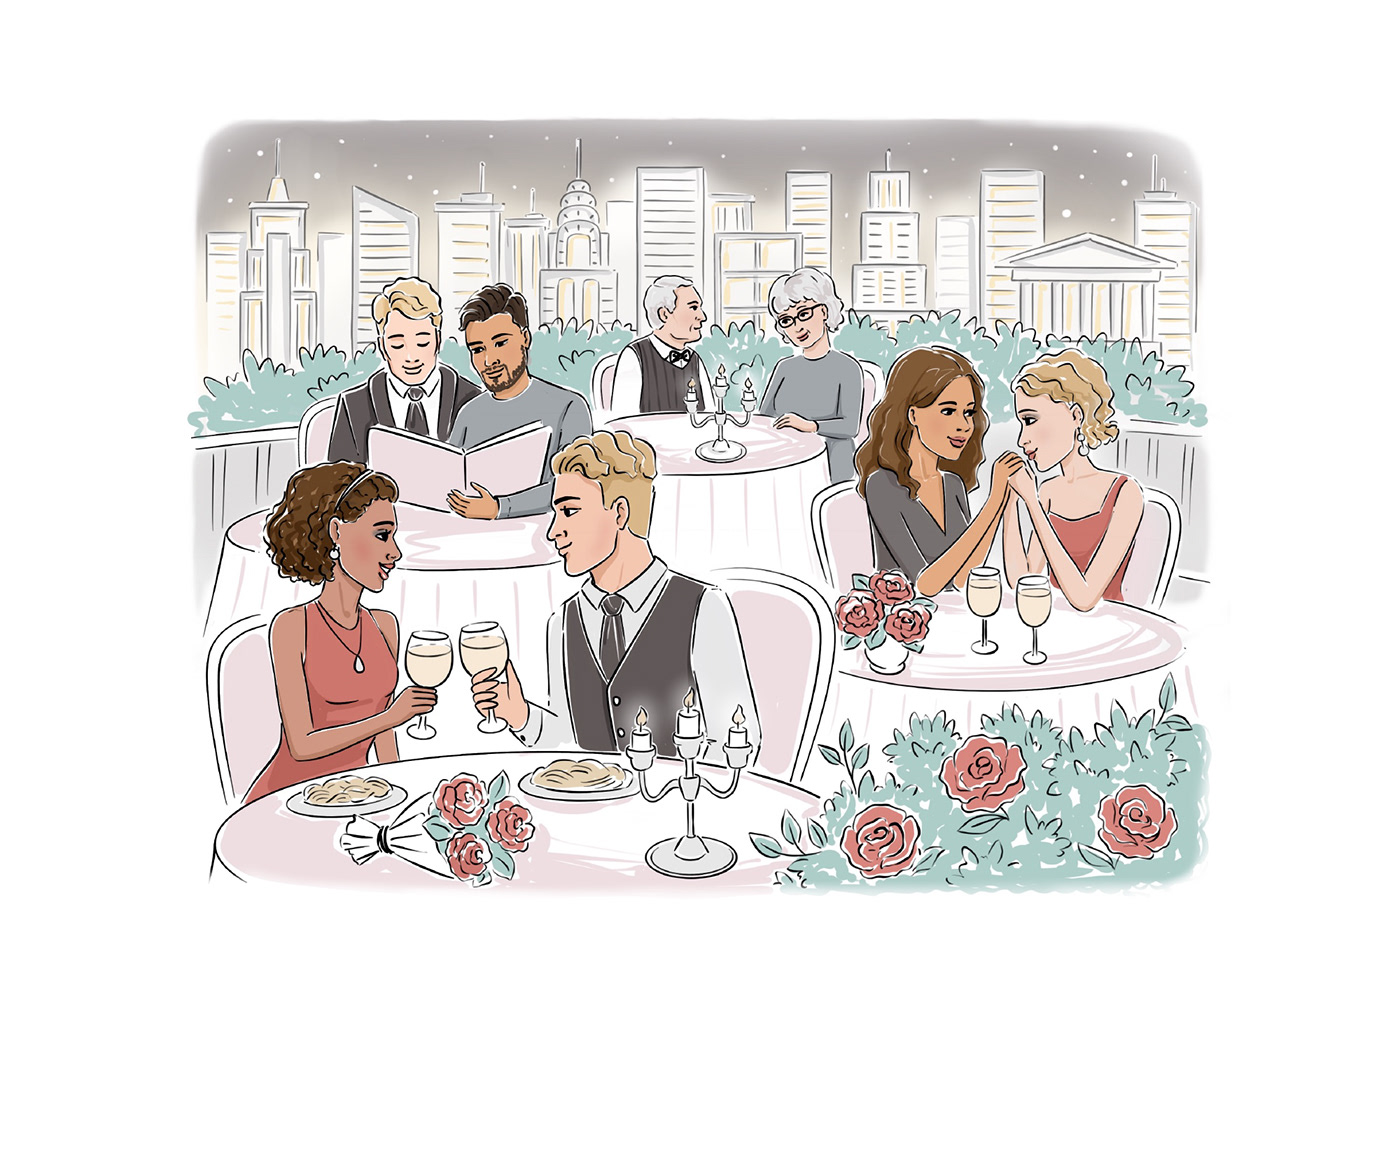 valentines day illustration for the real estage agency. Diverse couples in the restaurant